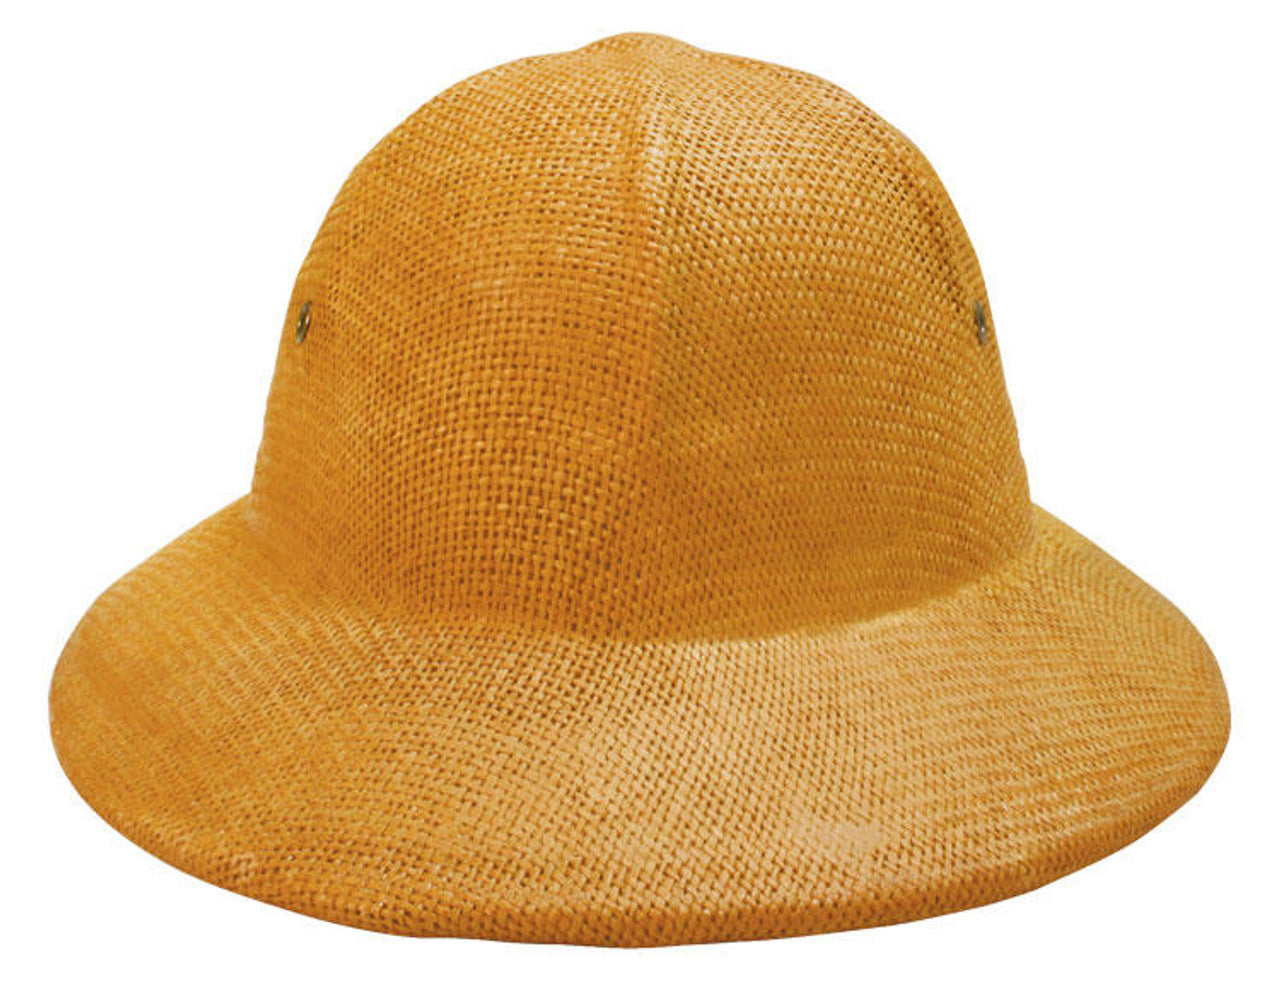 Protective tan helmet with ventilation for optimal comfort and safety